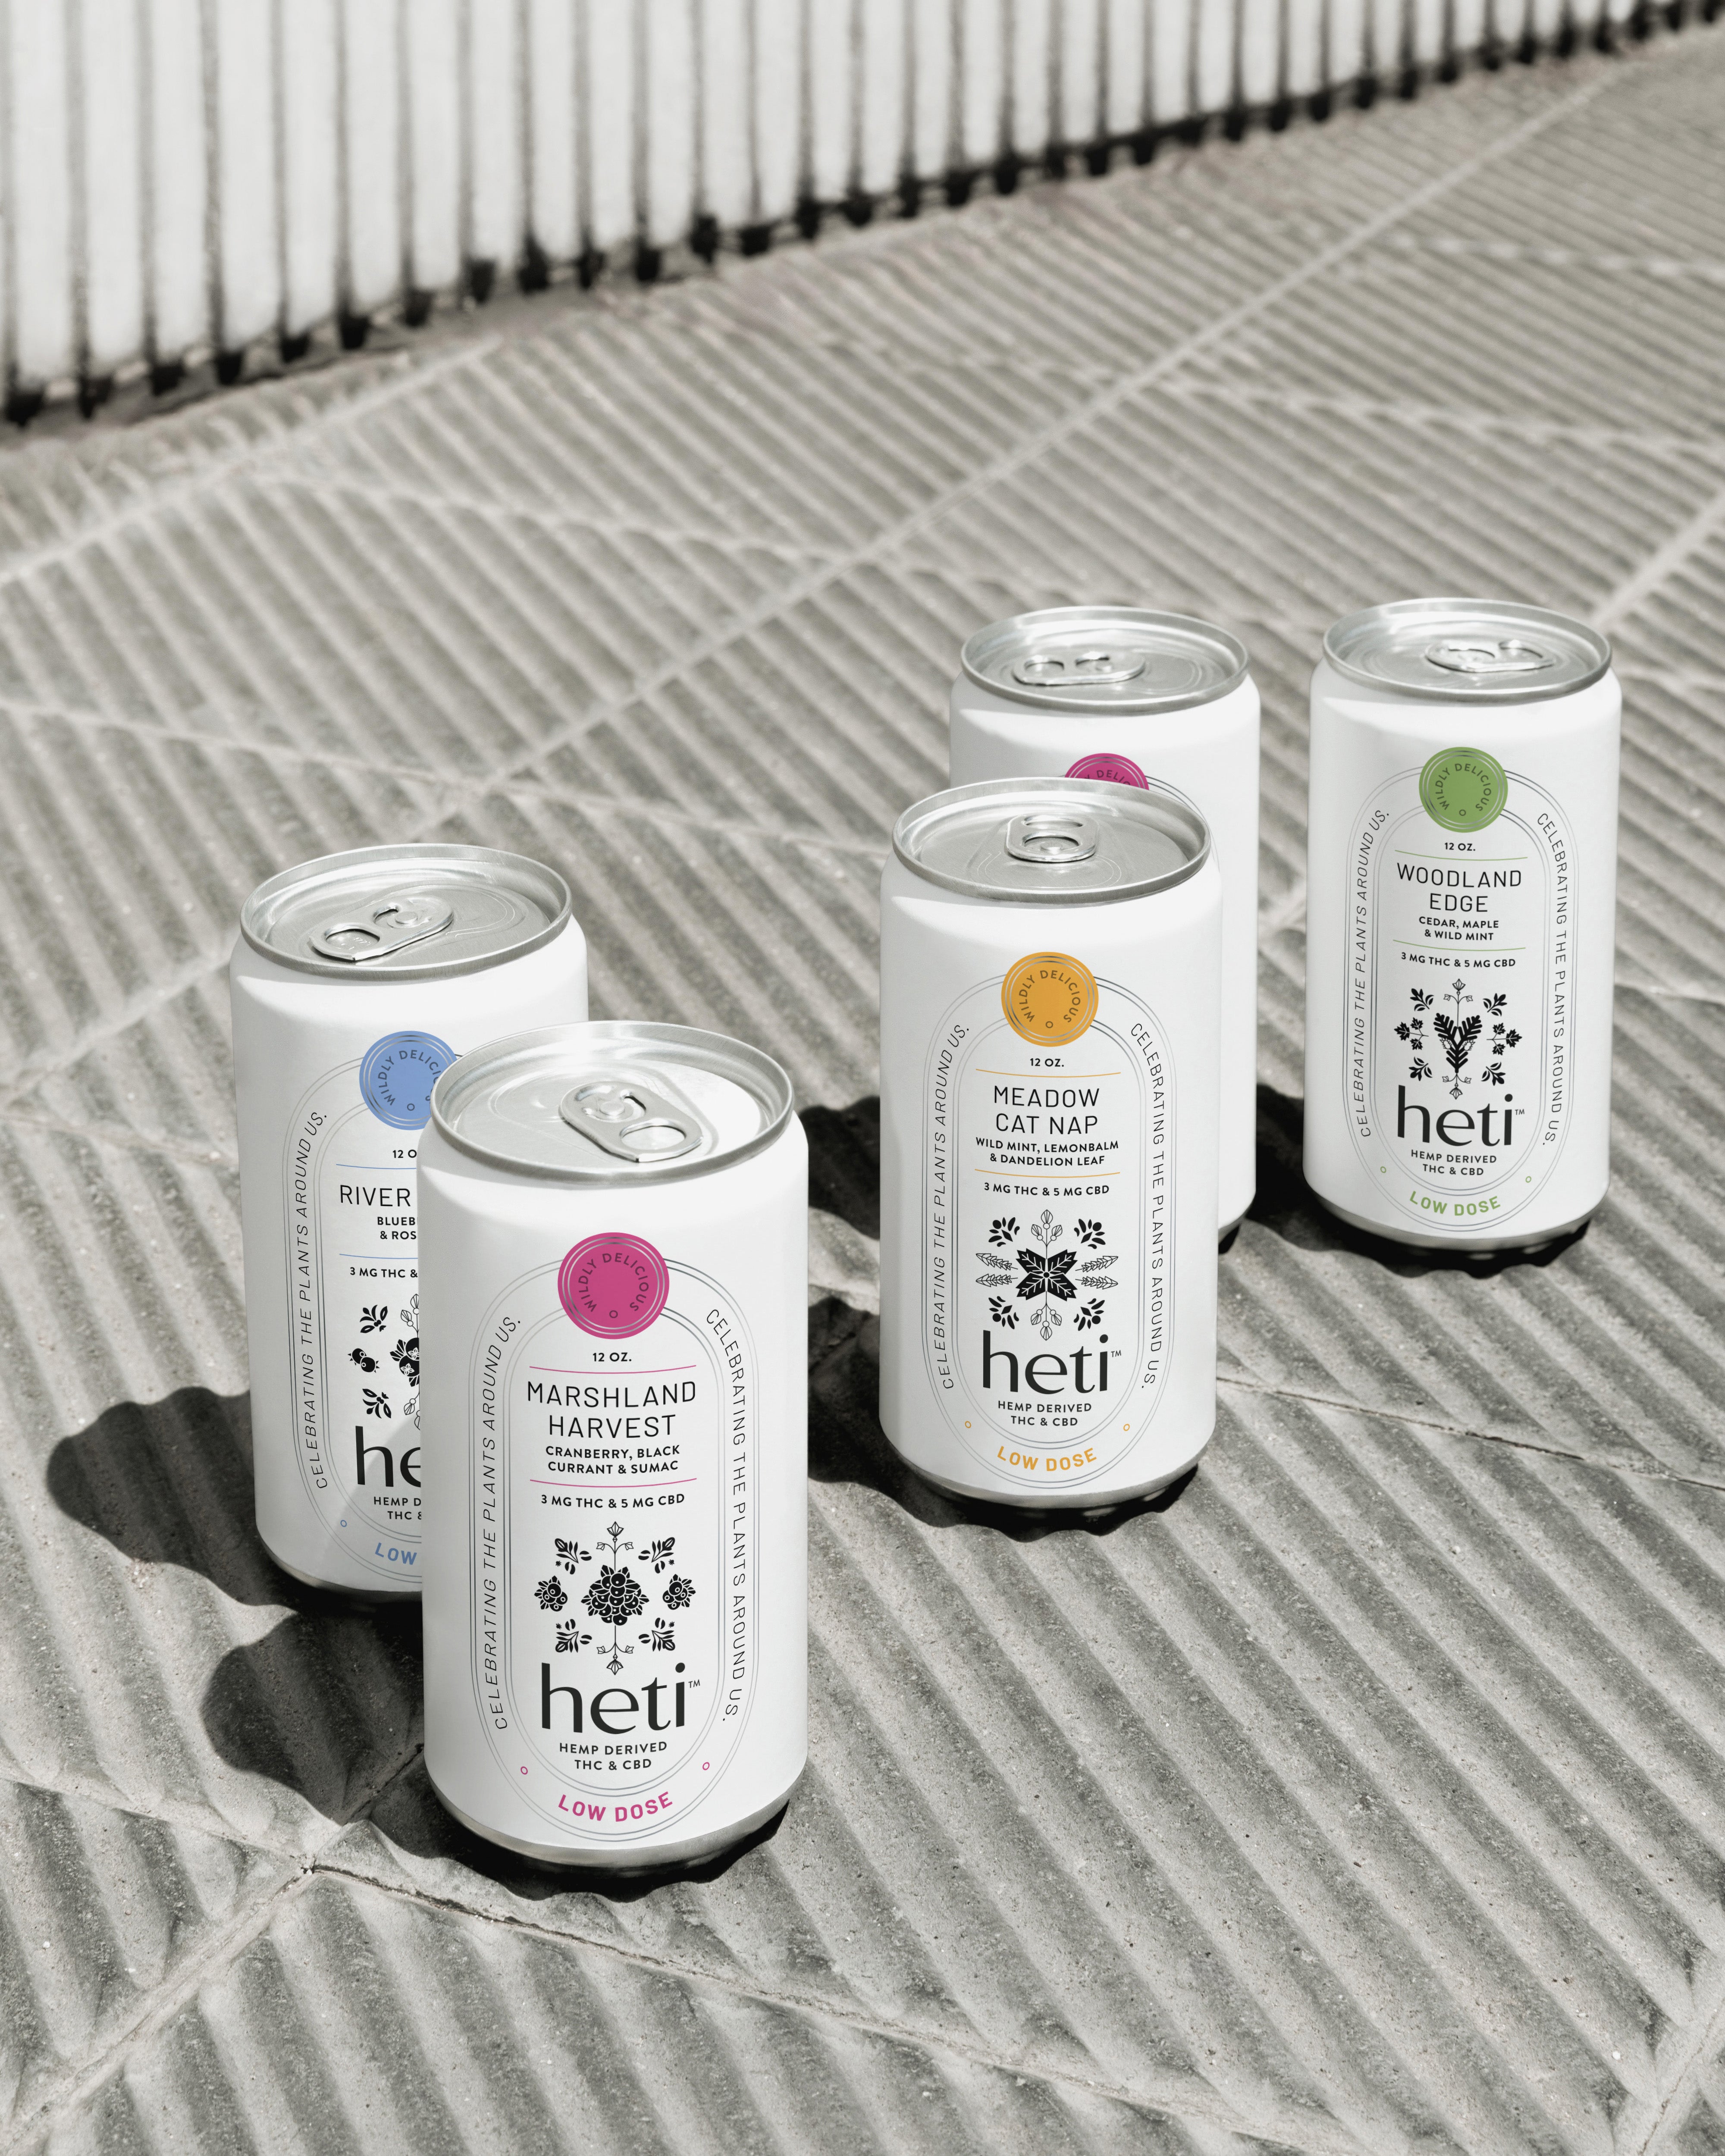 All four flavors of Heti THC beverages River Path, Marshland Harvest, Meadow Cat Nap, and Woodland Edge